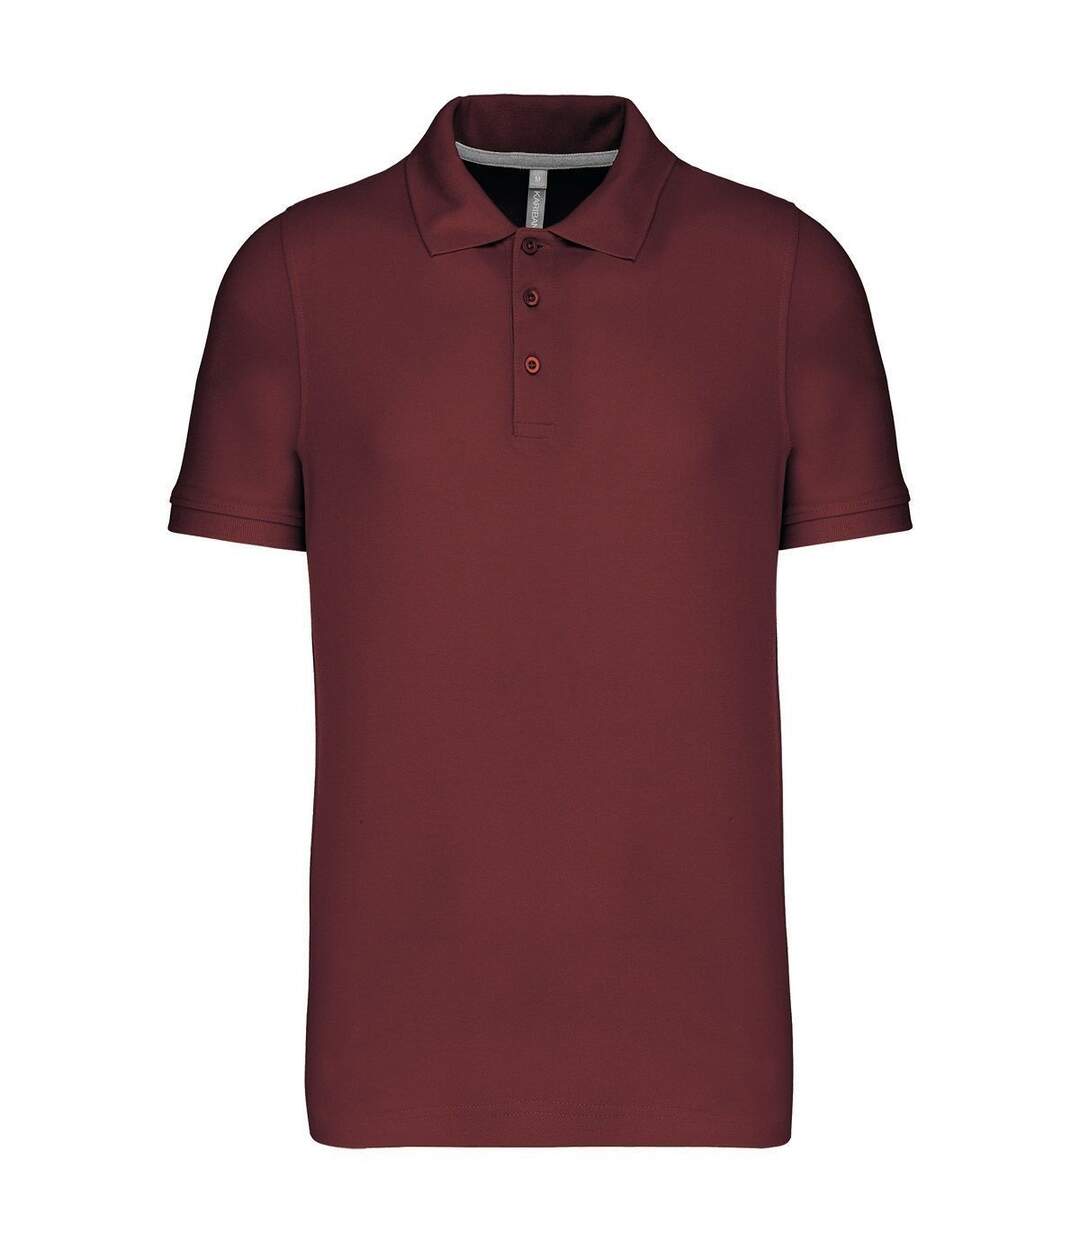 Polo manches courtes - Homme - K241 - rouge vin